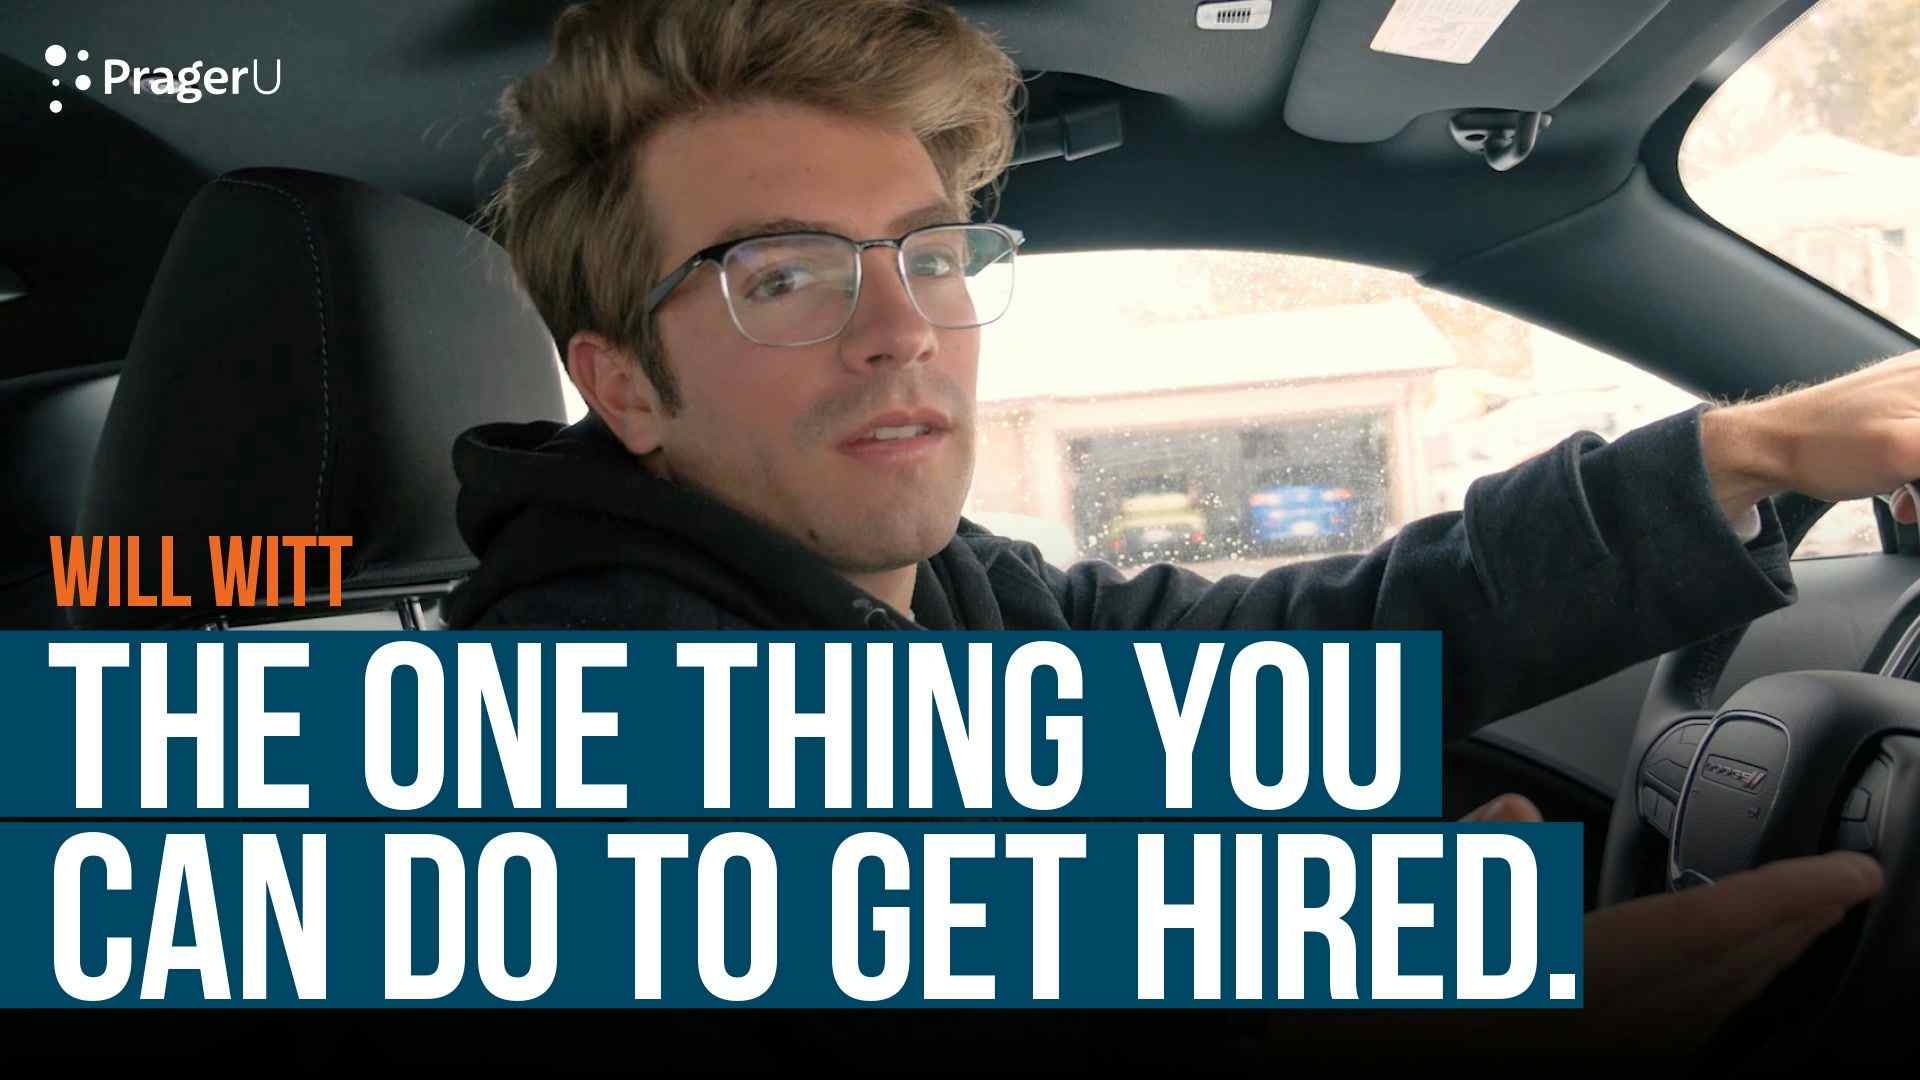 The One Thing You Can Do to Get Hired